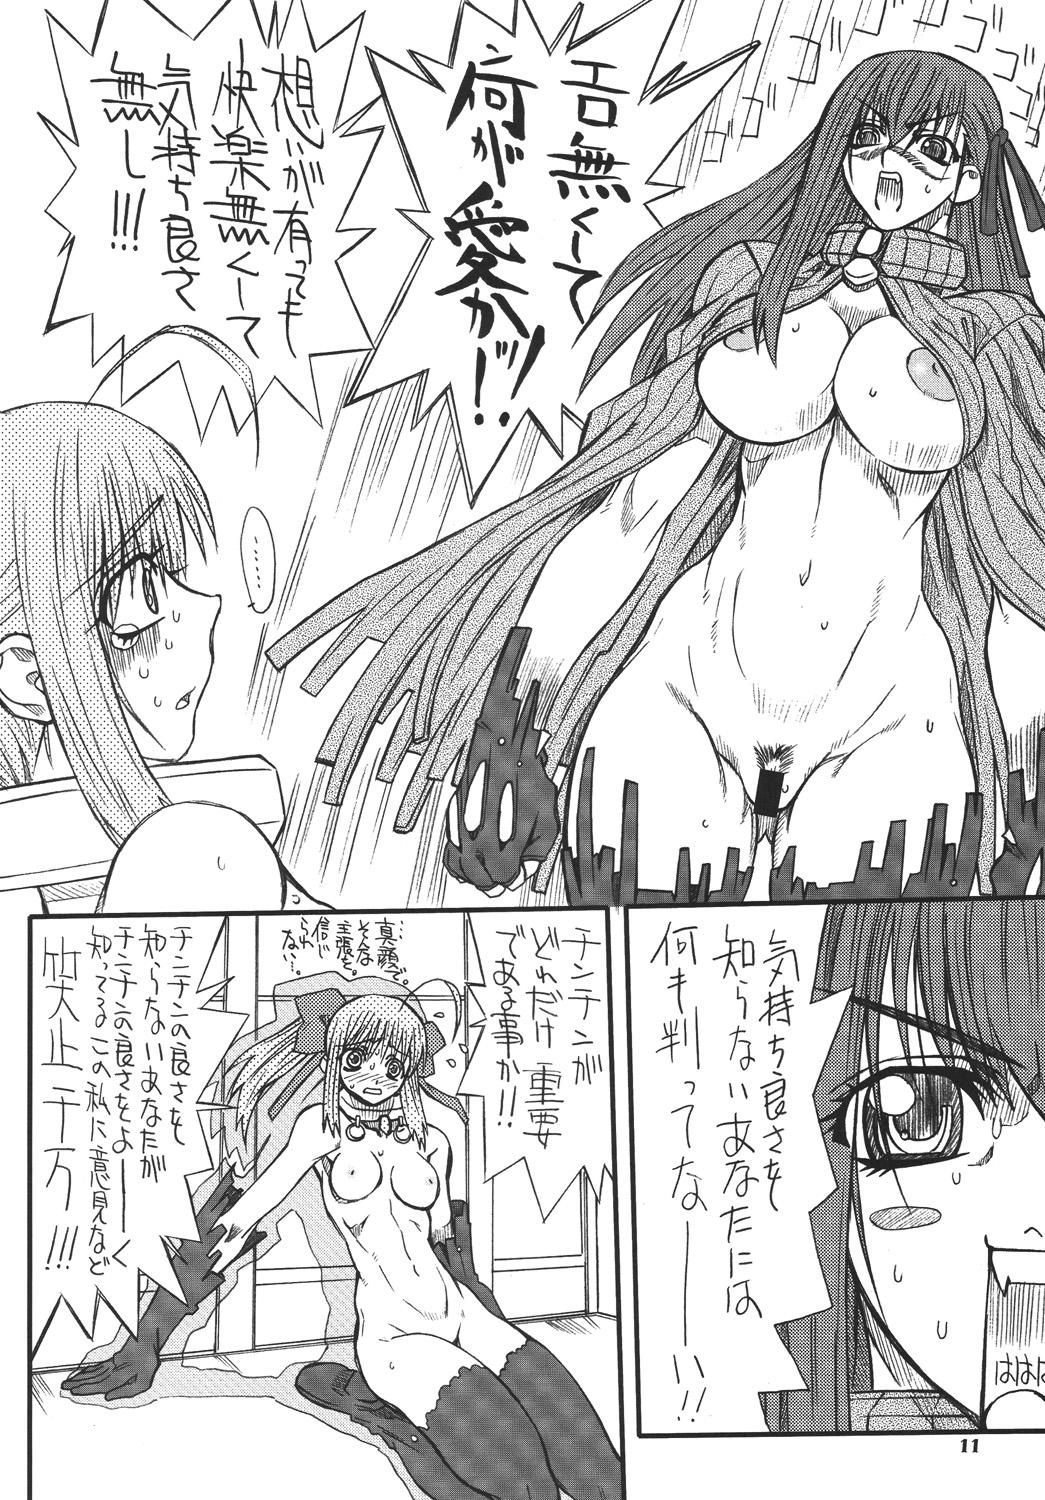 Adult Akihime Yon - Fate stay night Bro - Page 10